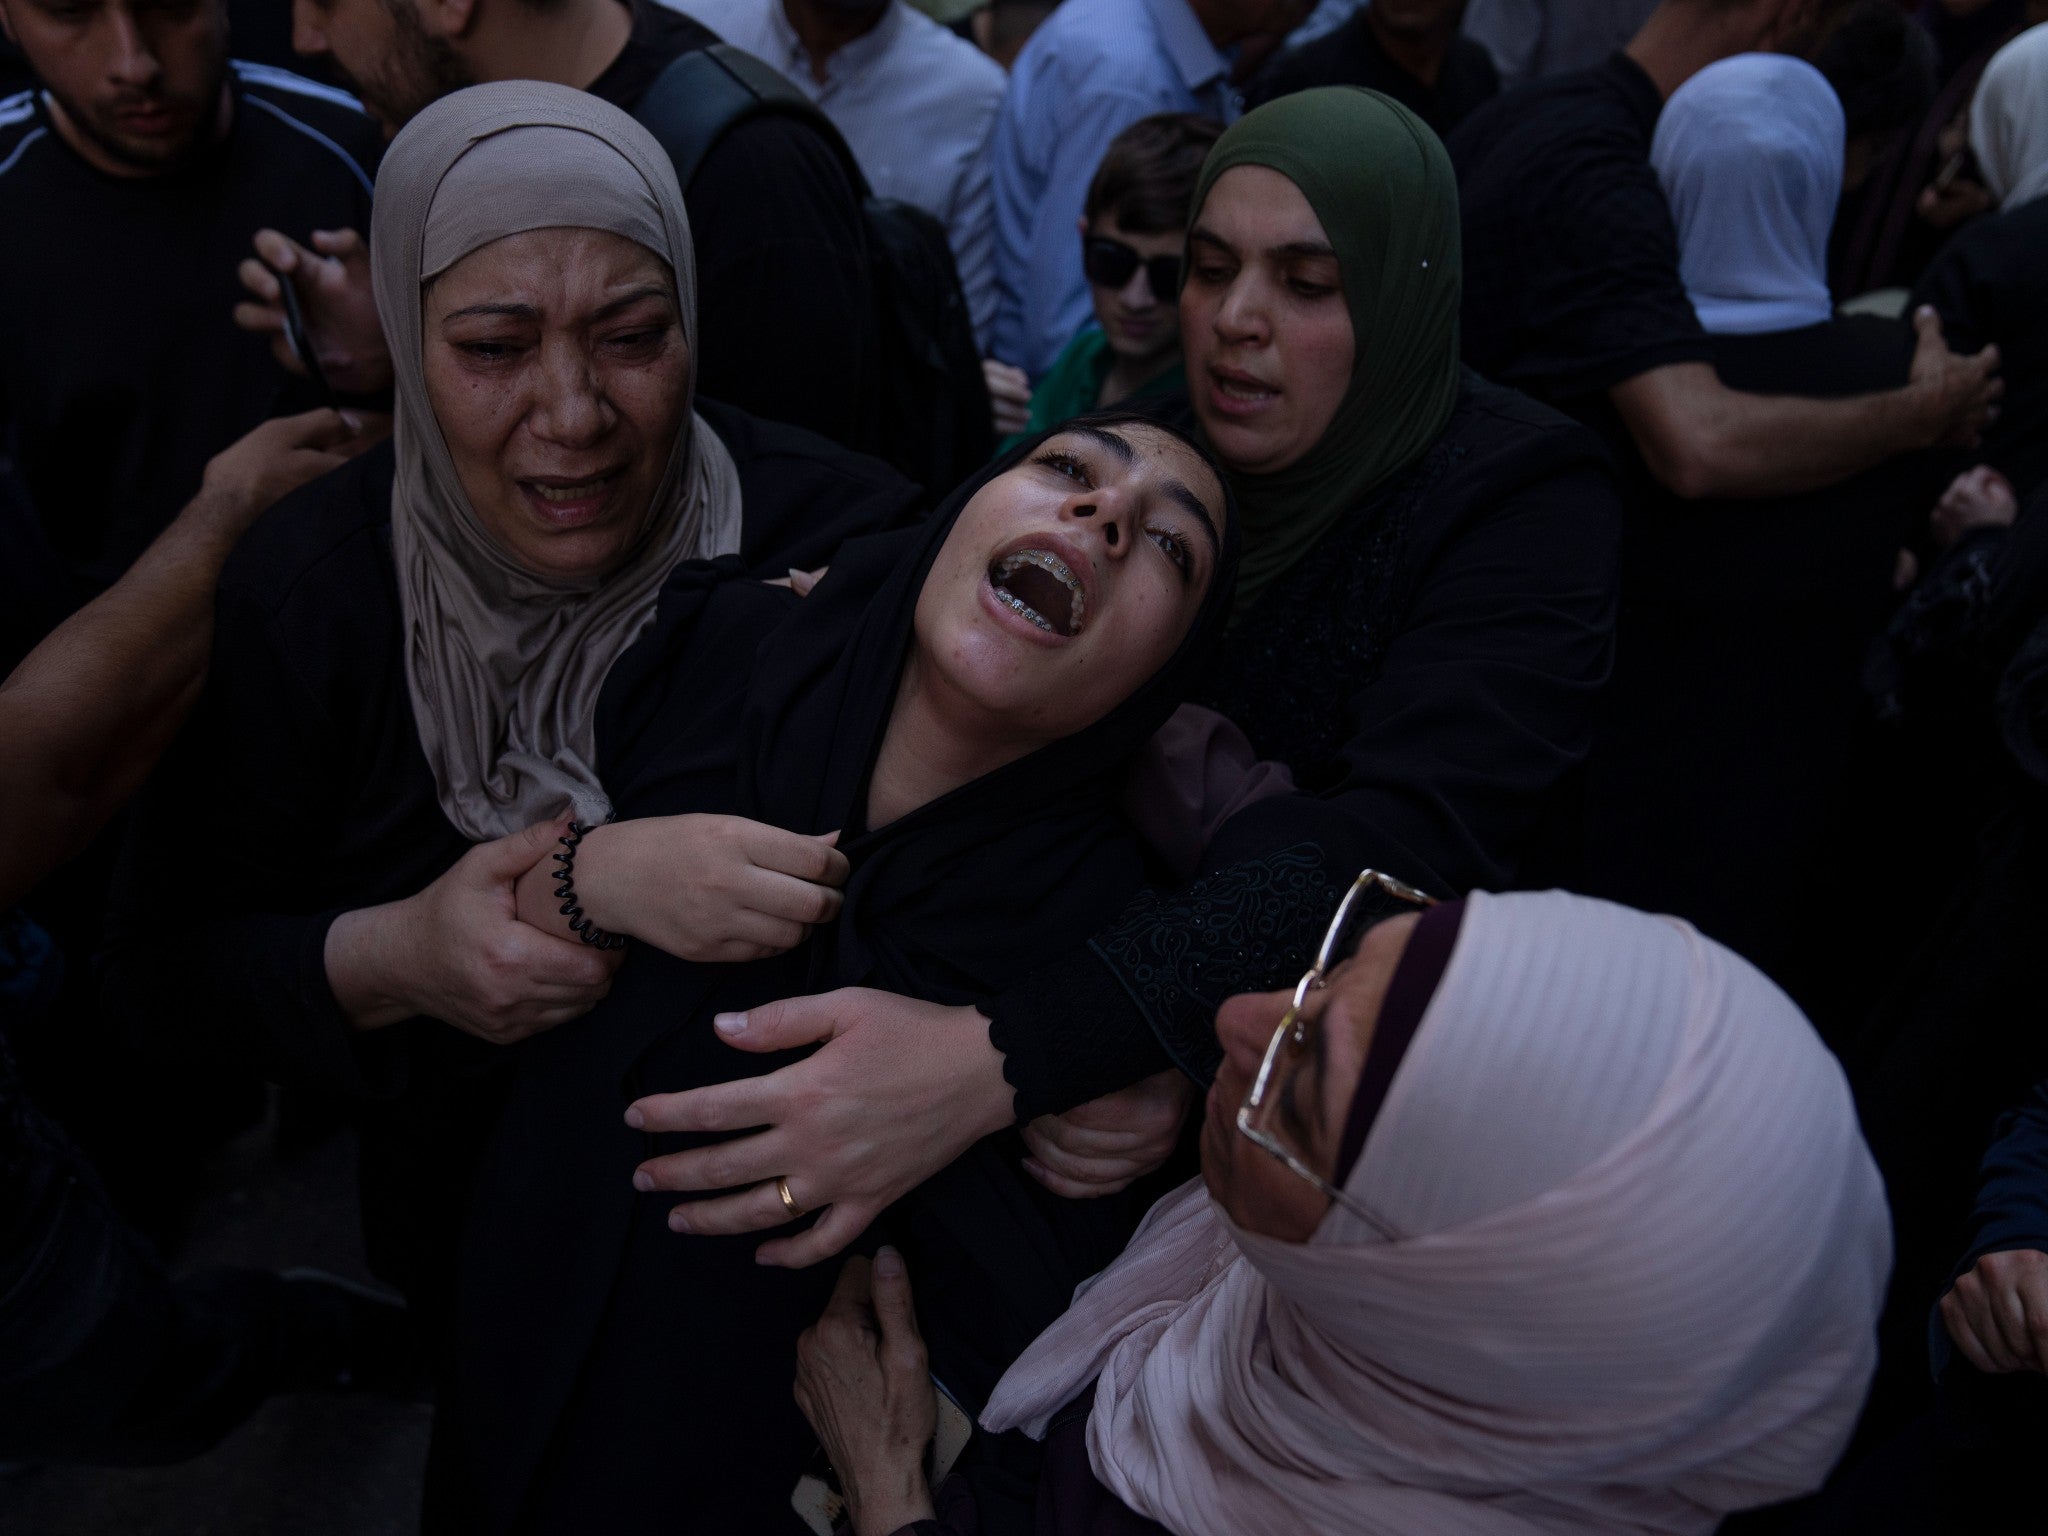 Fatima, centre, sister of Fares Abu Samra, 14, cries during his funeral